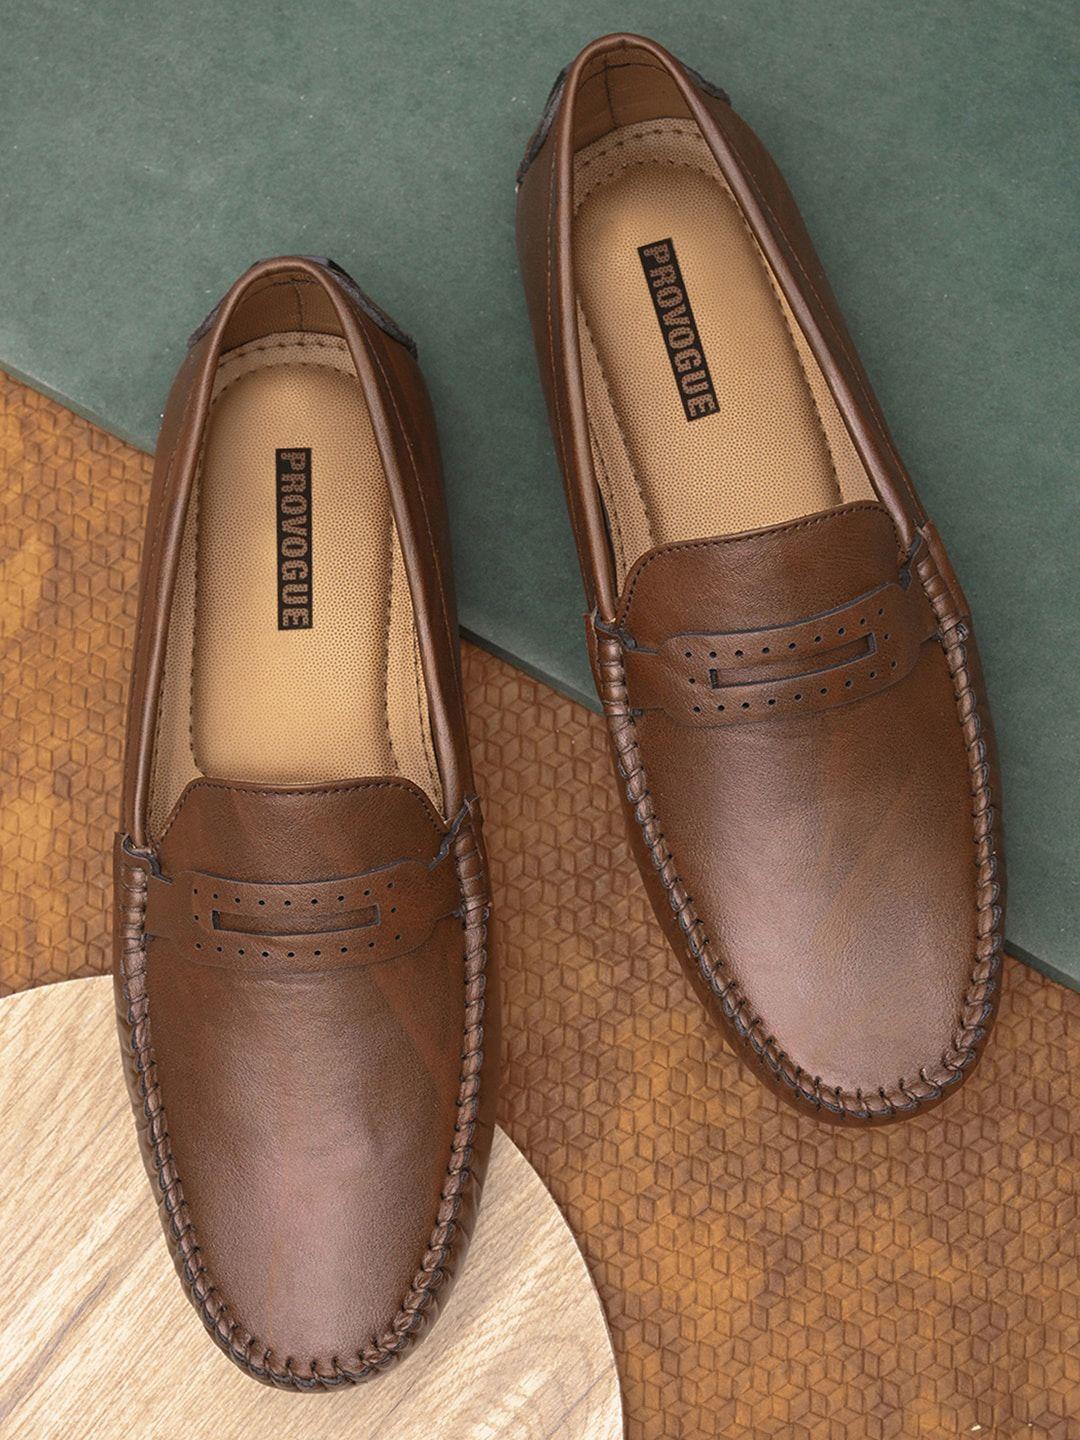 provogue-men-brown-perforations-loafers